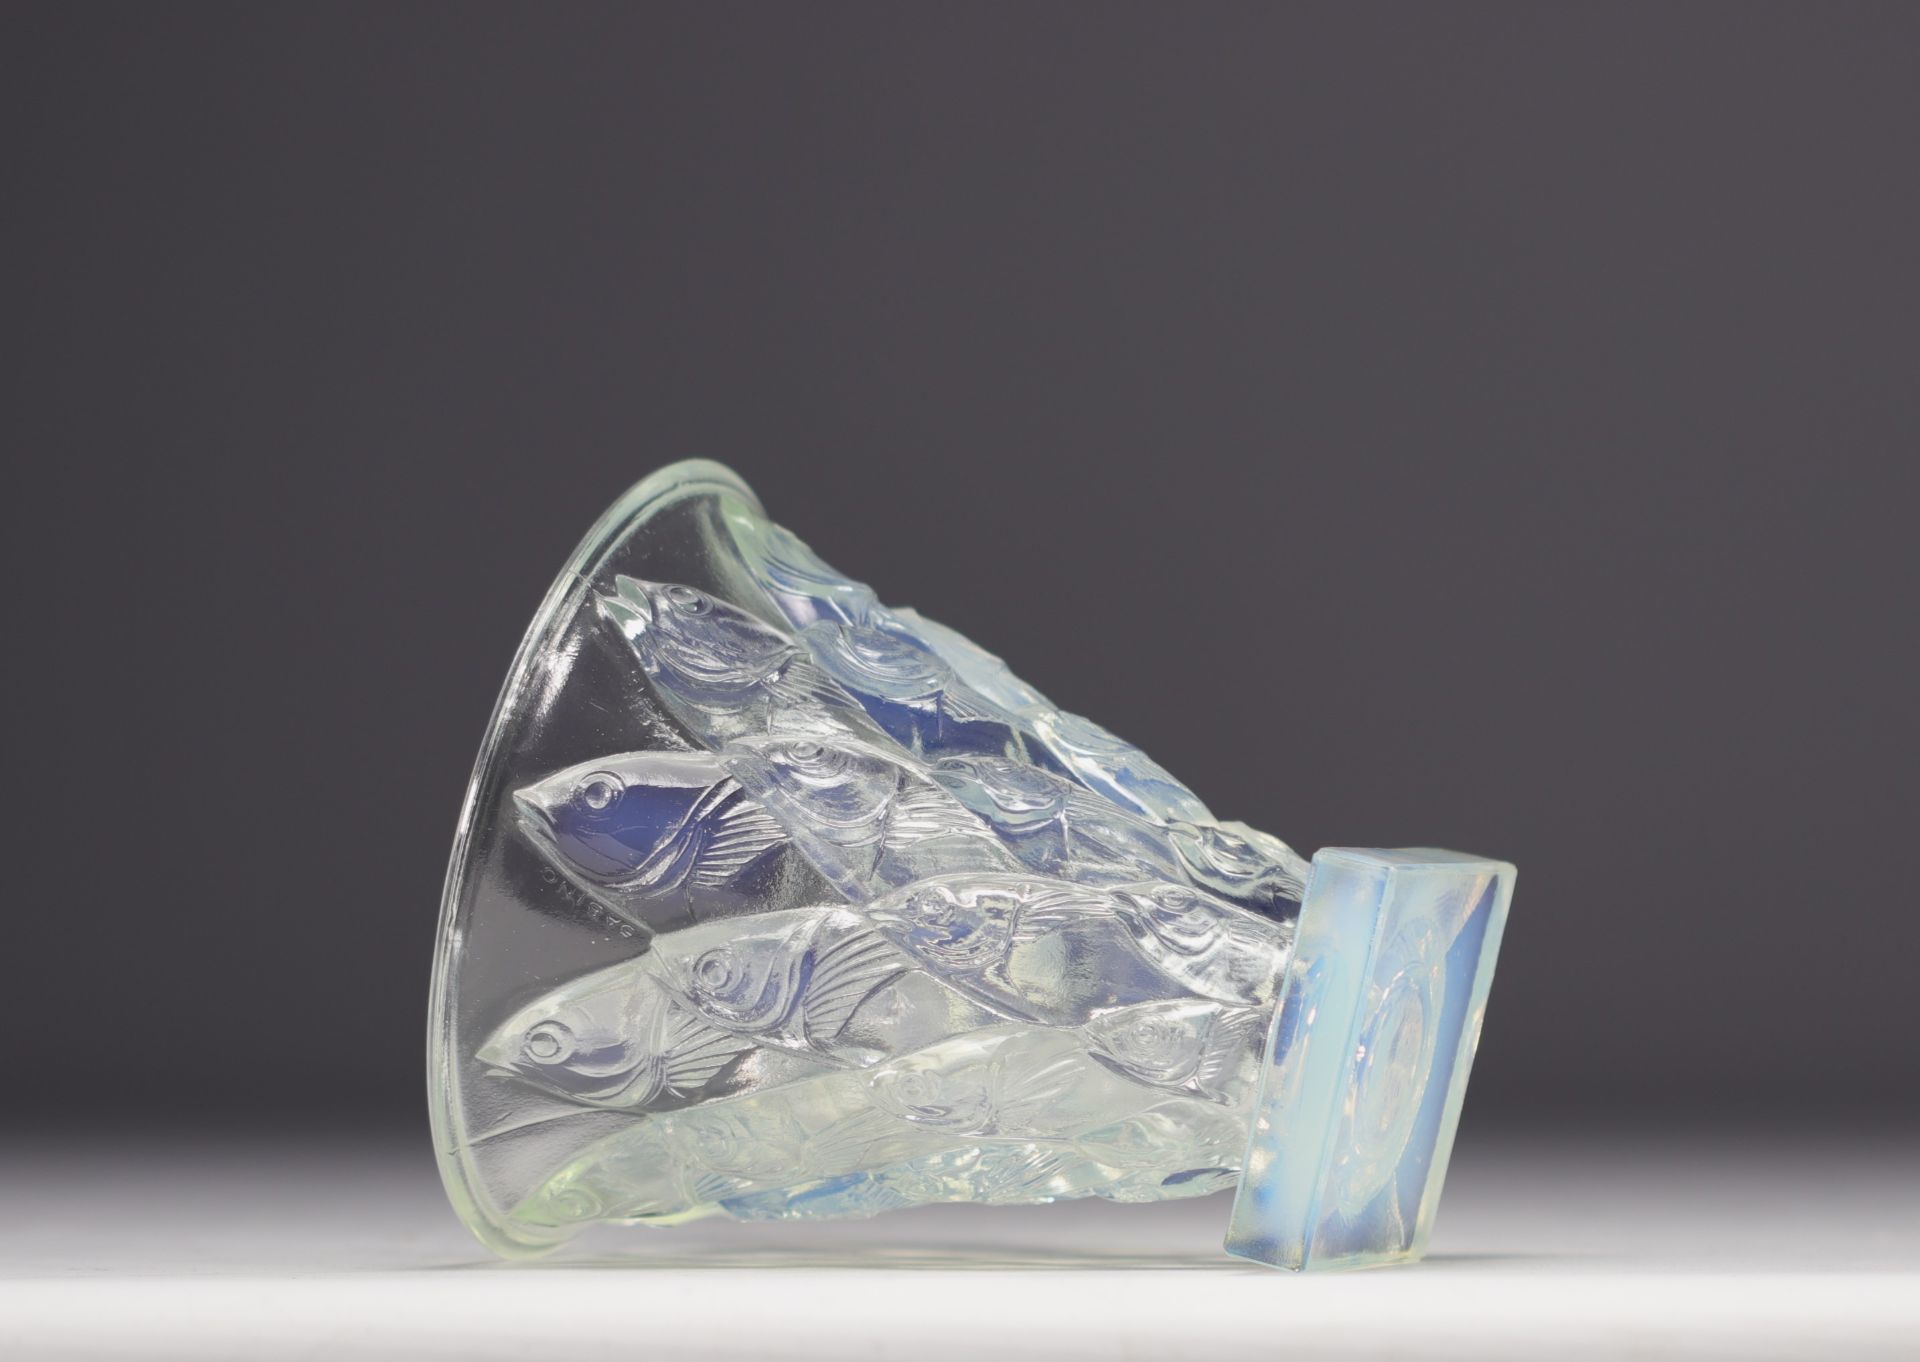 Marius SABINO (1878 -1961), "To the fish" ("Aux Poissons") vase in moulded glass. - Image 3 of 4